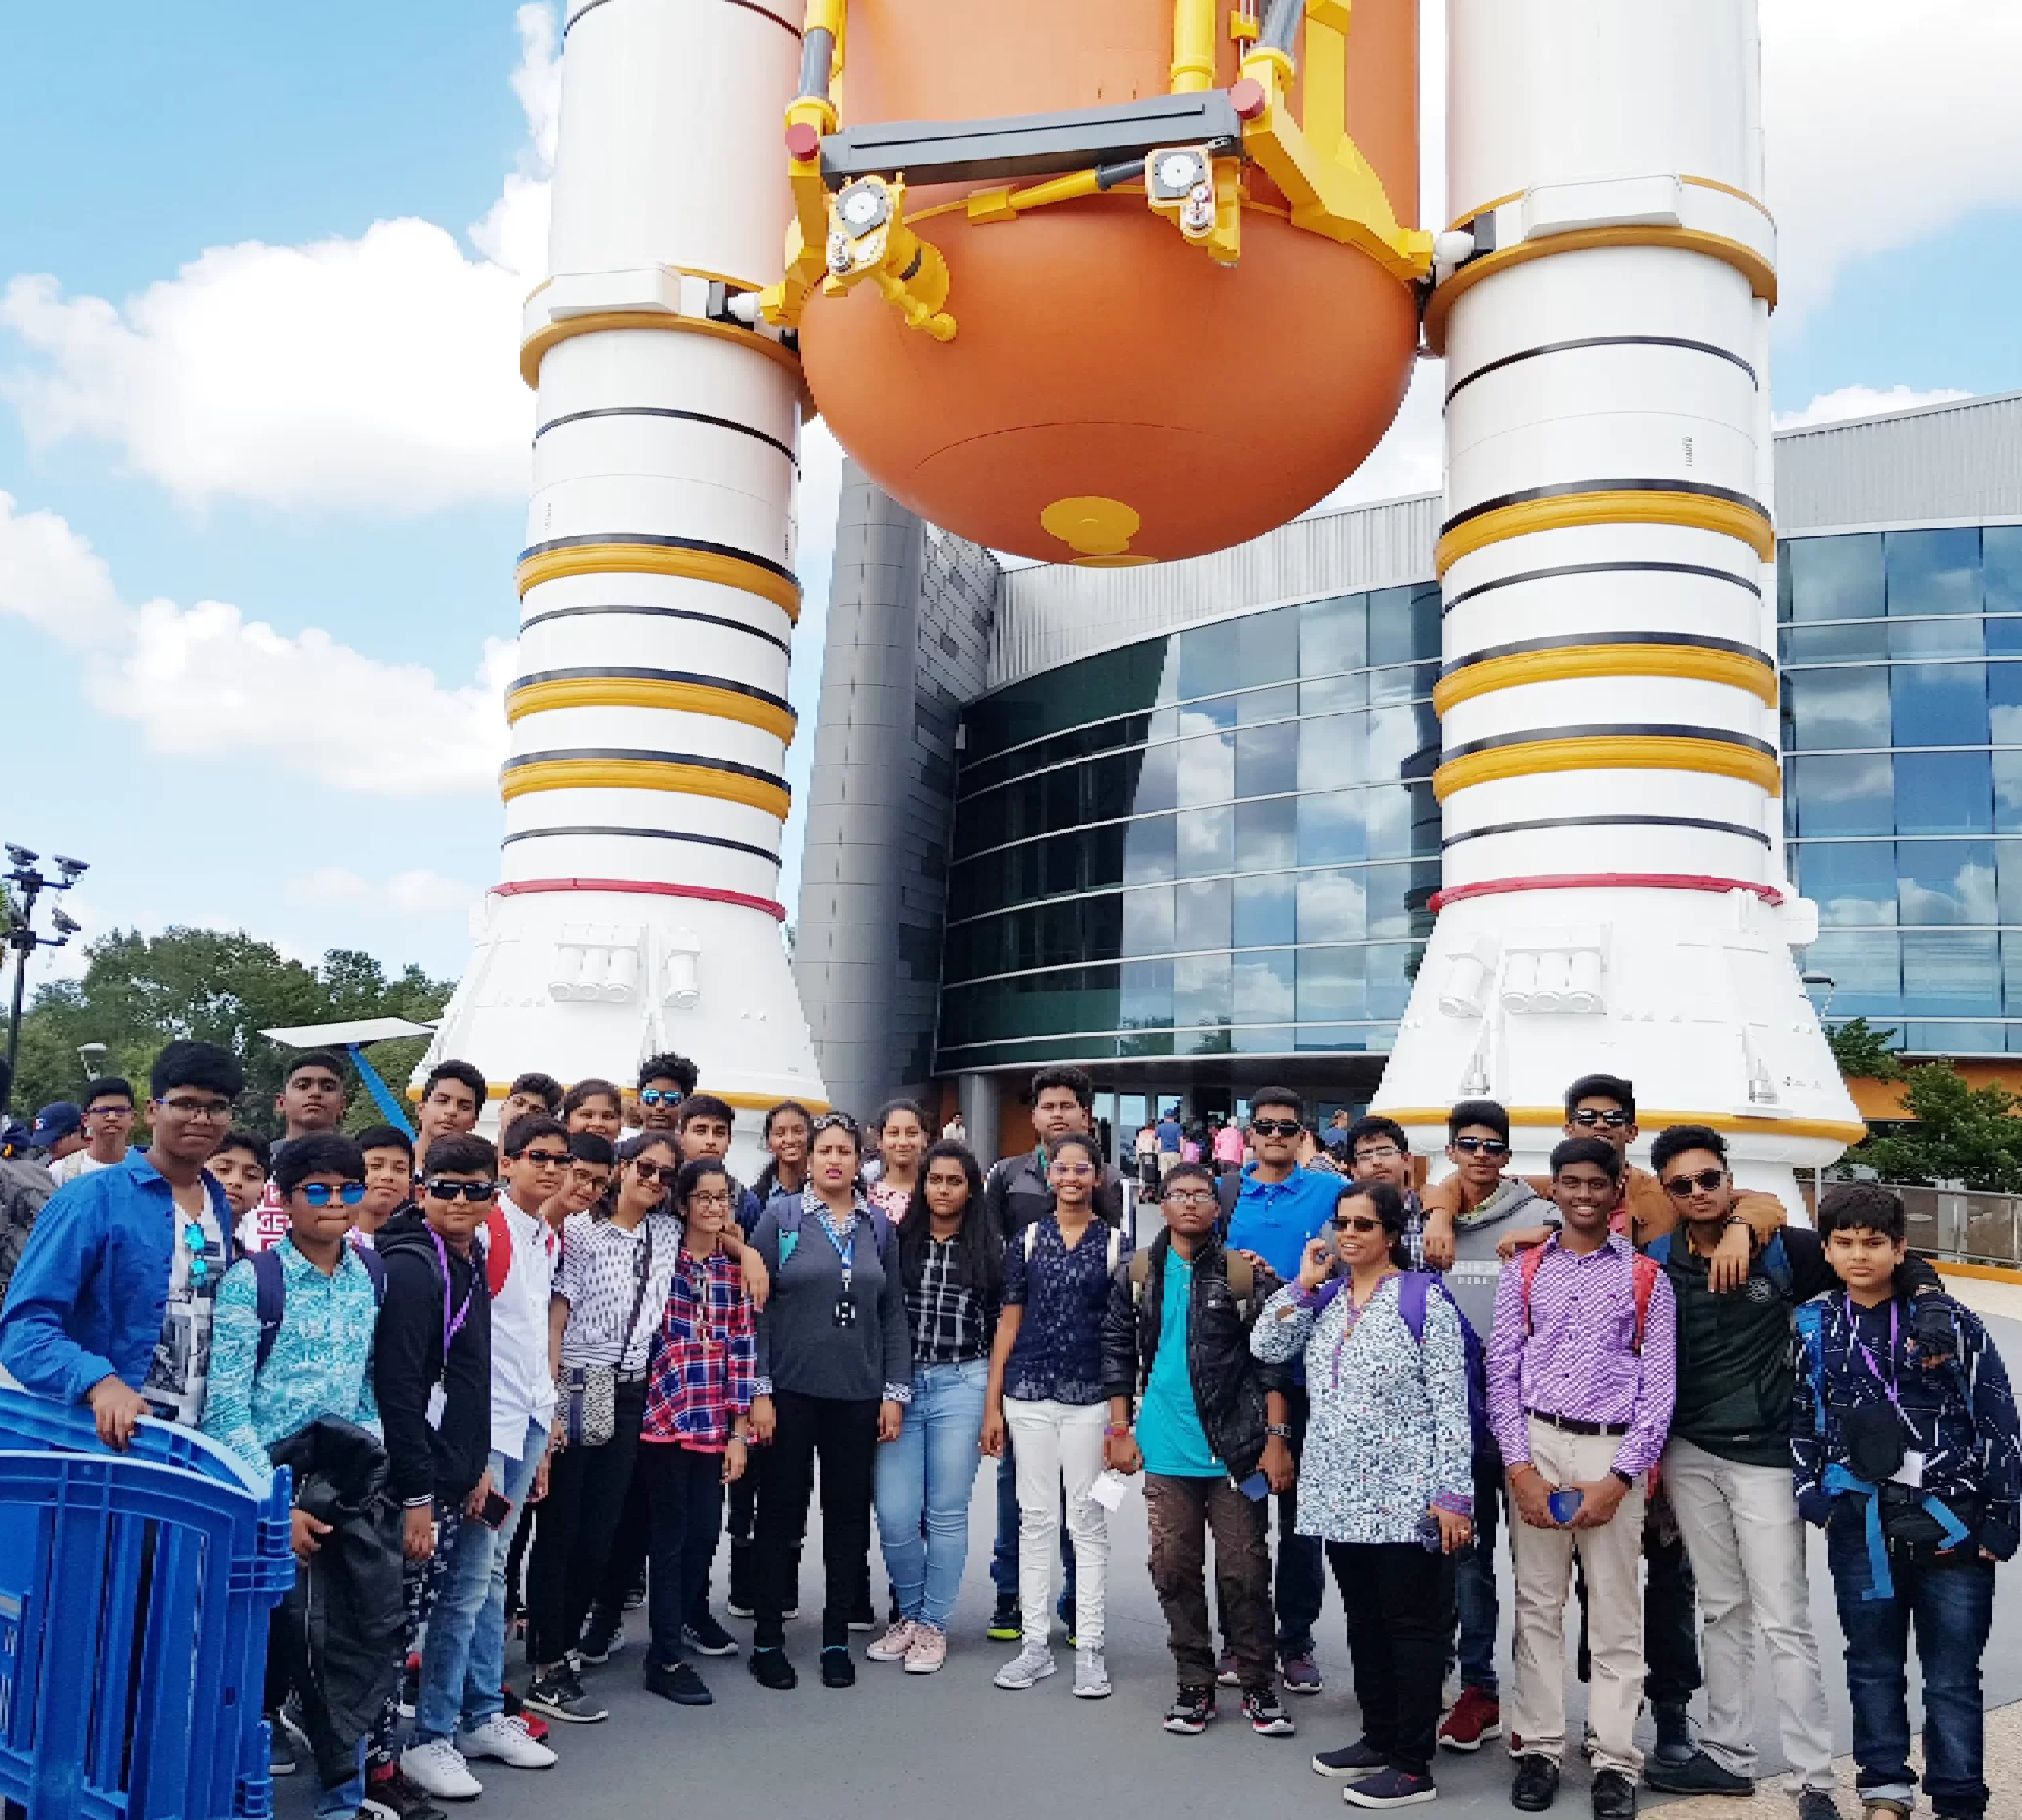 Students clicking picture outside the space centre in group during visit to NASA.